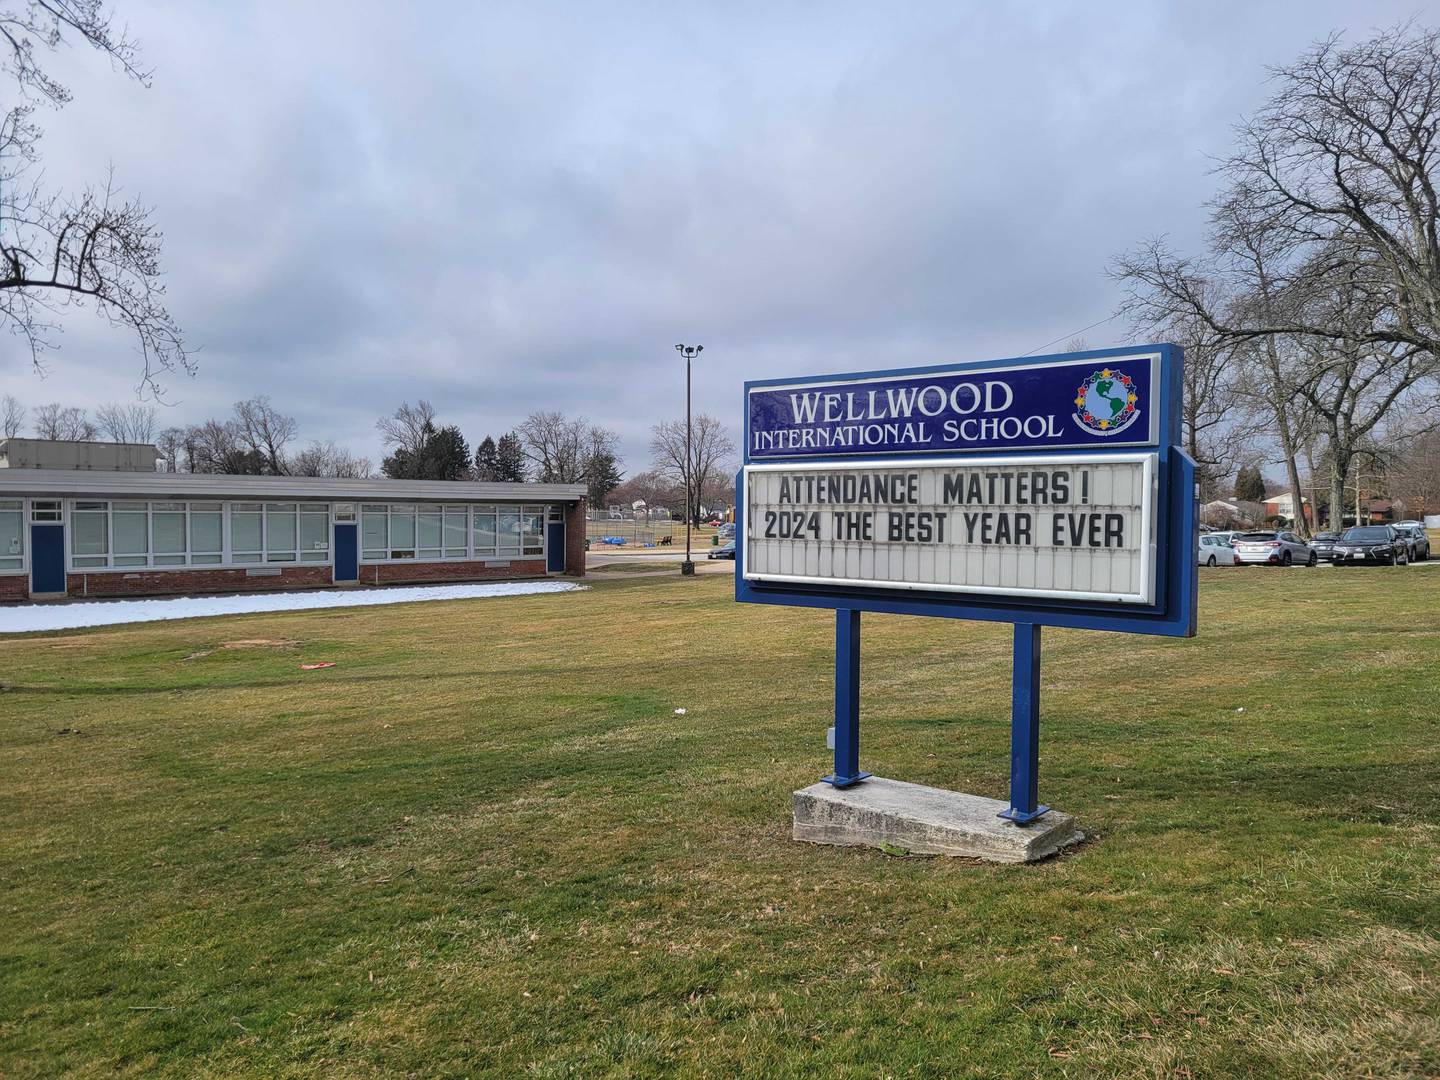 Wellwood International School in Pikesville is one of the overcrowded schools participating in a northwest area redistricting process organized by Baltimore County Public Schools.